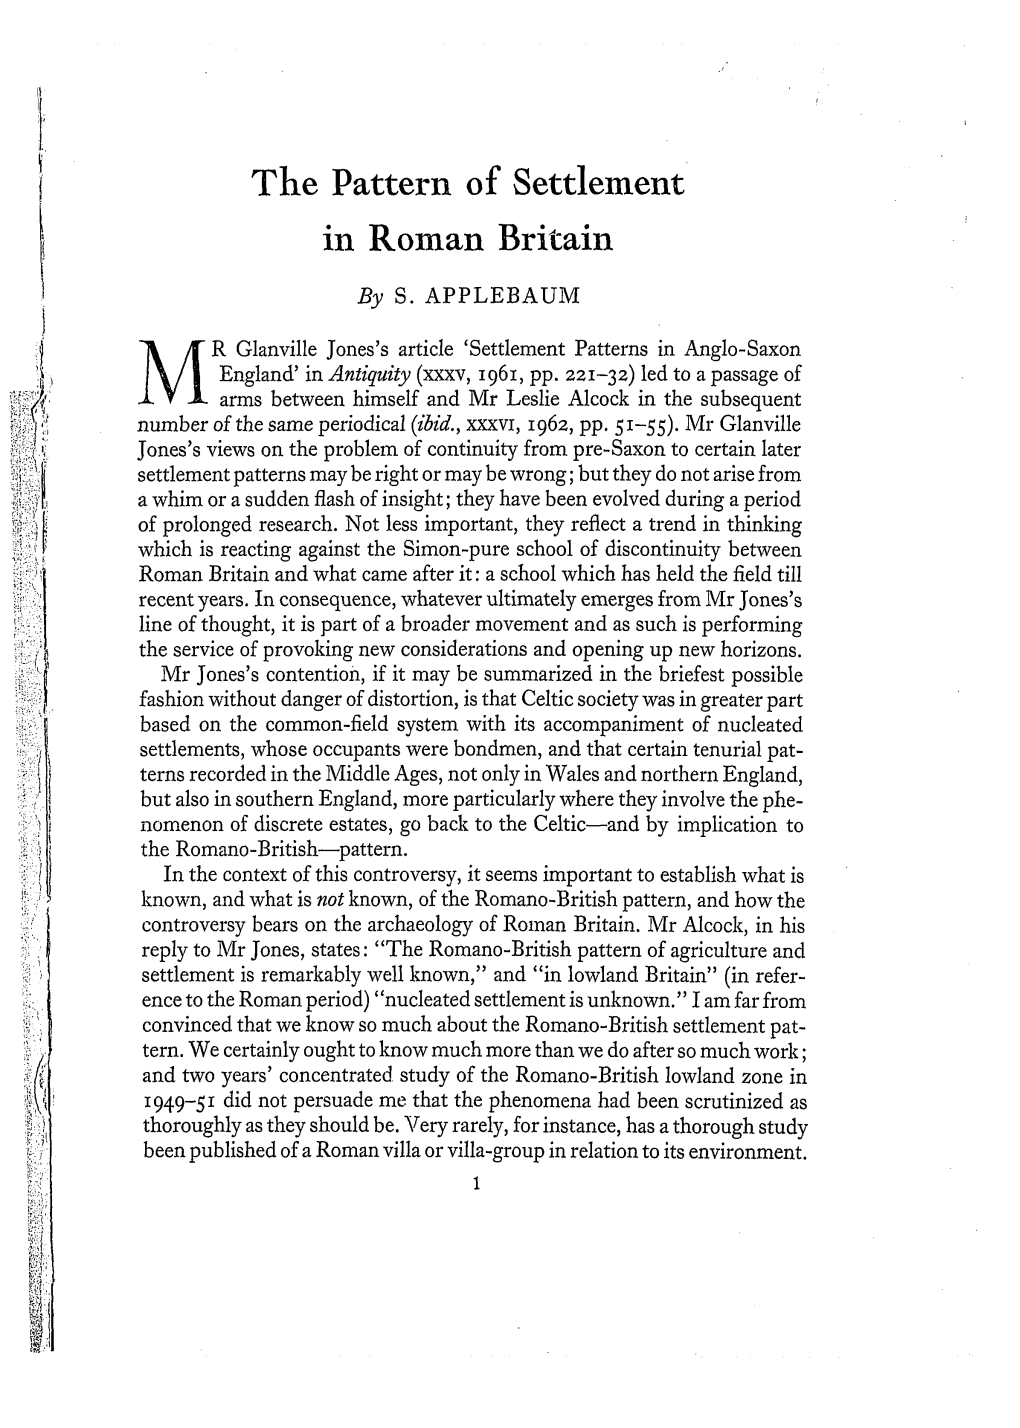 The Pattern of Settlement in Roman Britain